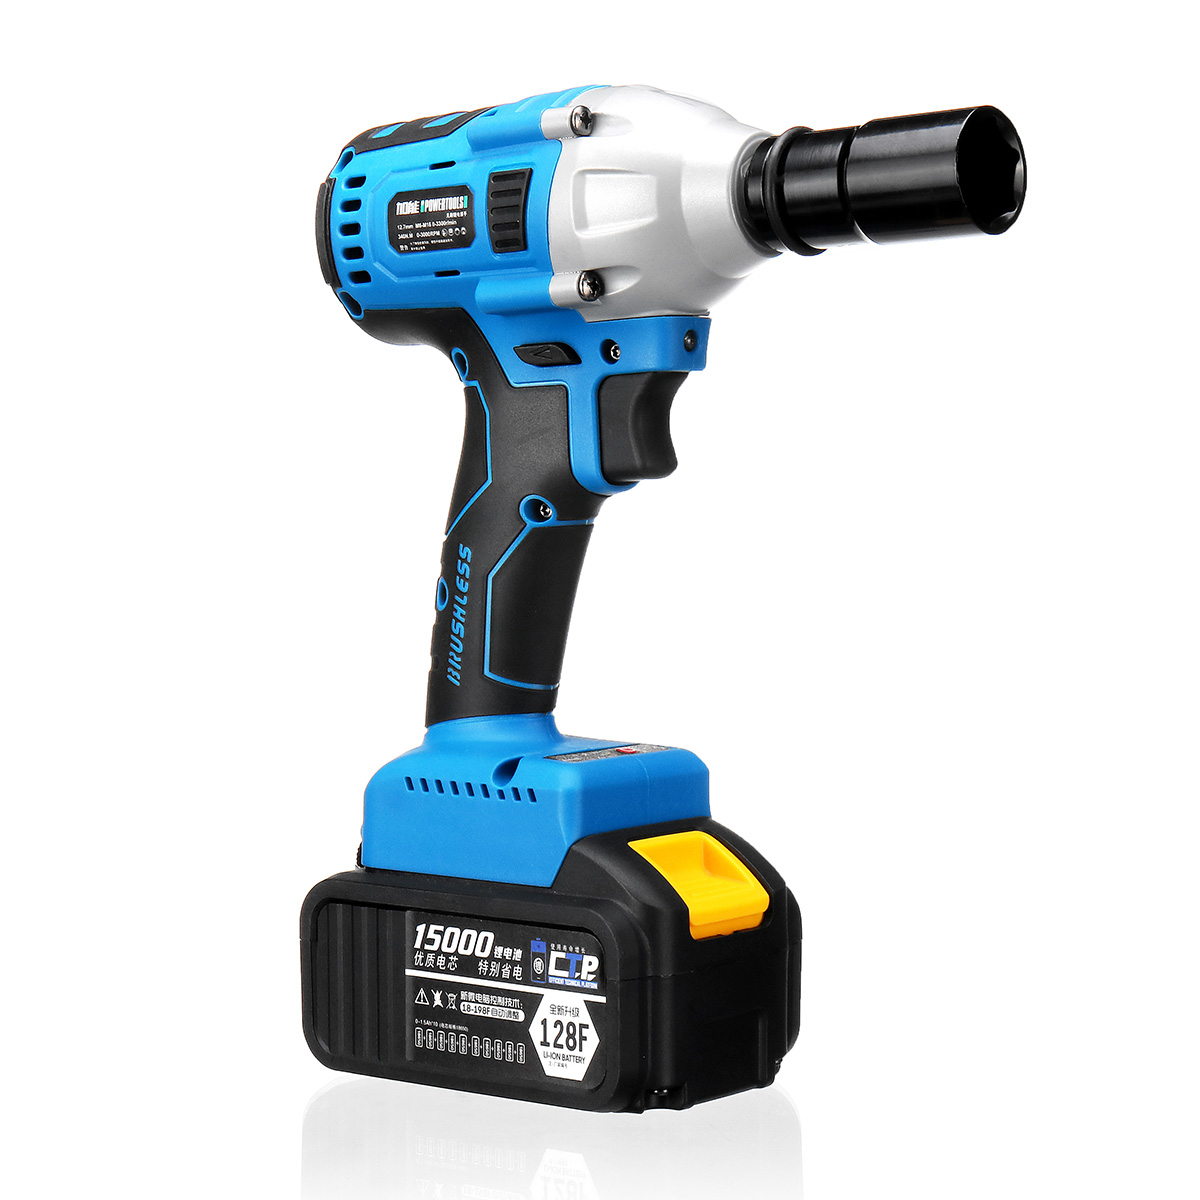 

15000mAh Electric Impact Wrench 340Nm Cordless Brushless with Rechargeable Battery